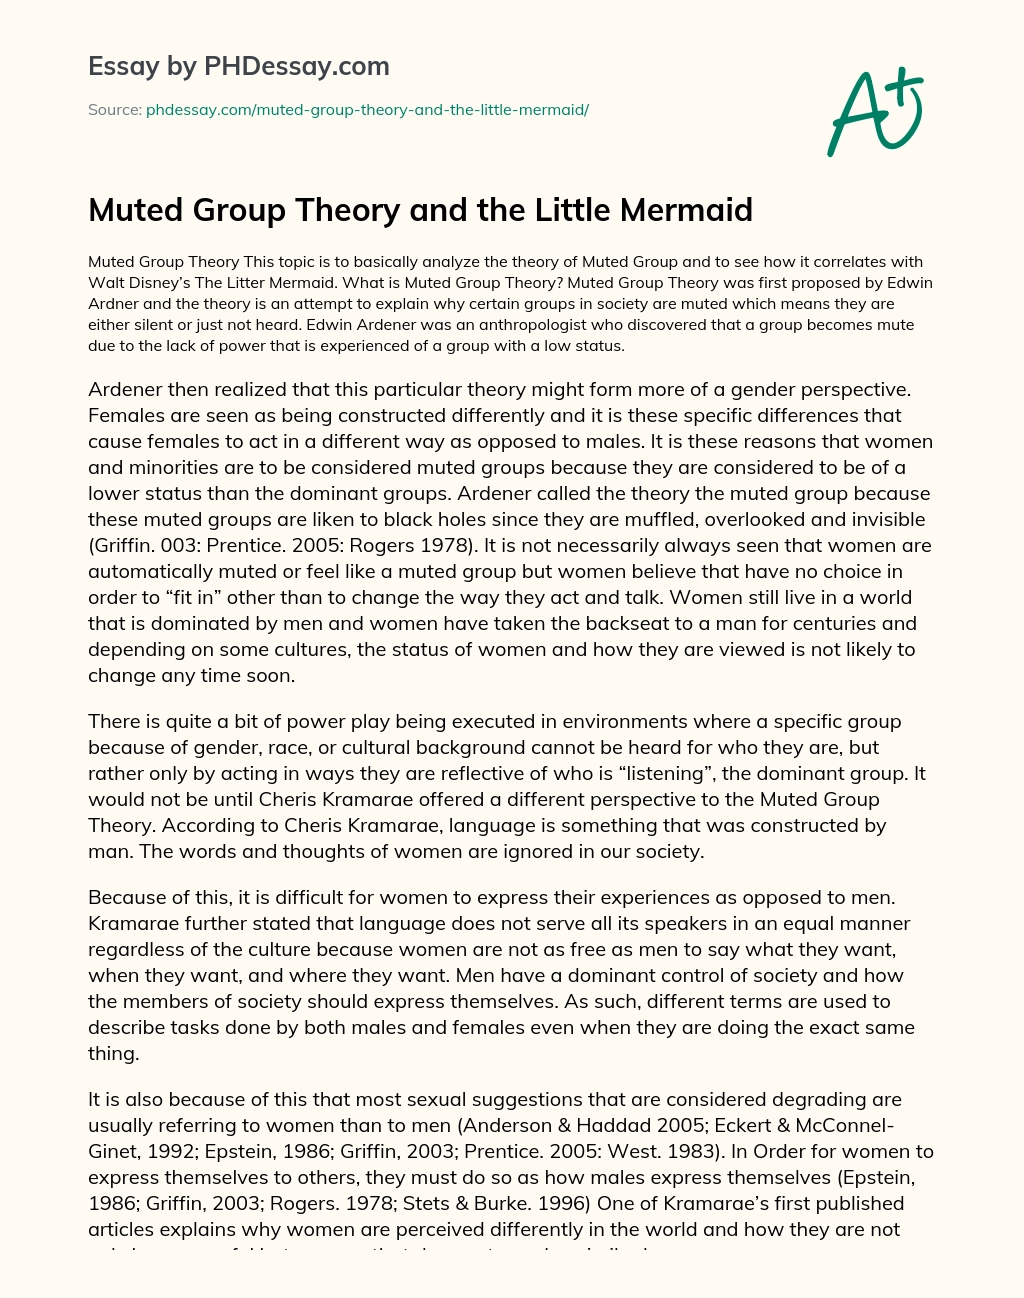 muted group theory definition